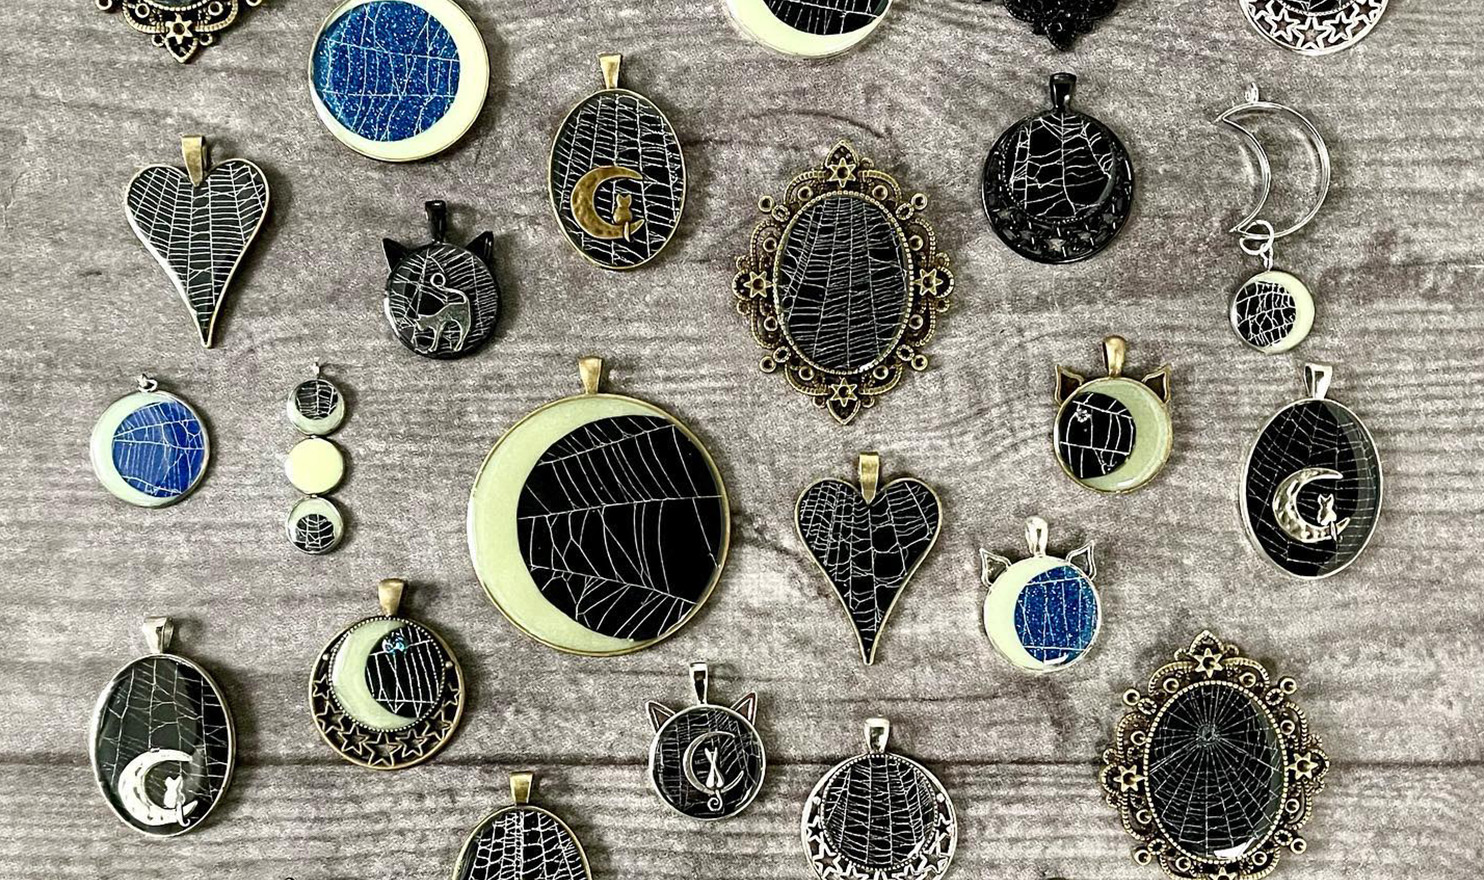 A variety of gothic inspired necklace pendants laying on a wood table feature preserved spiderwebs on them.